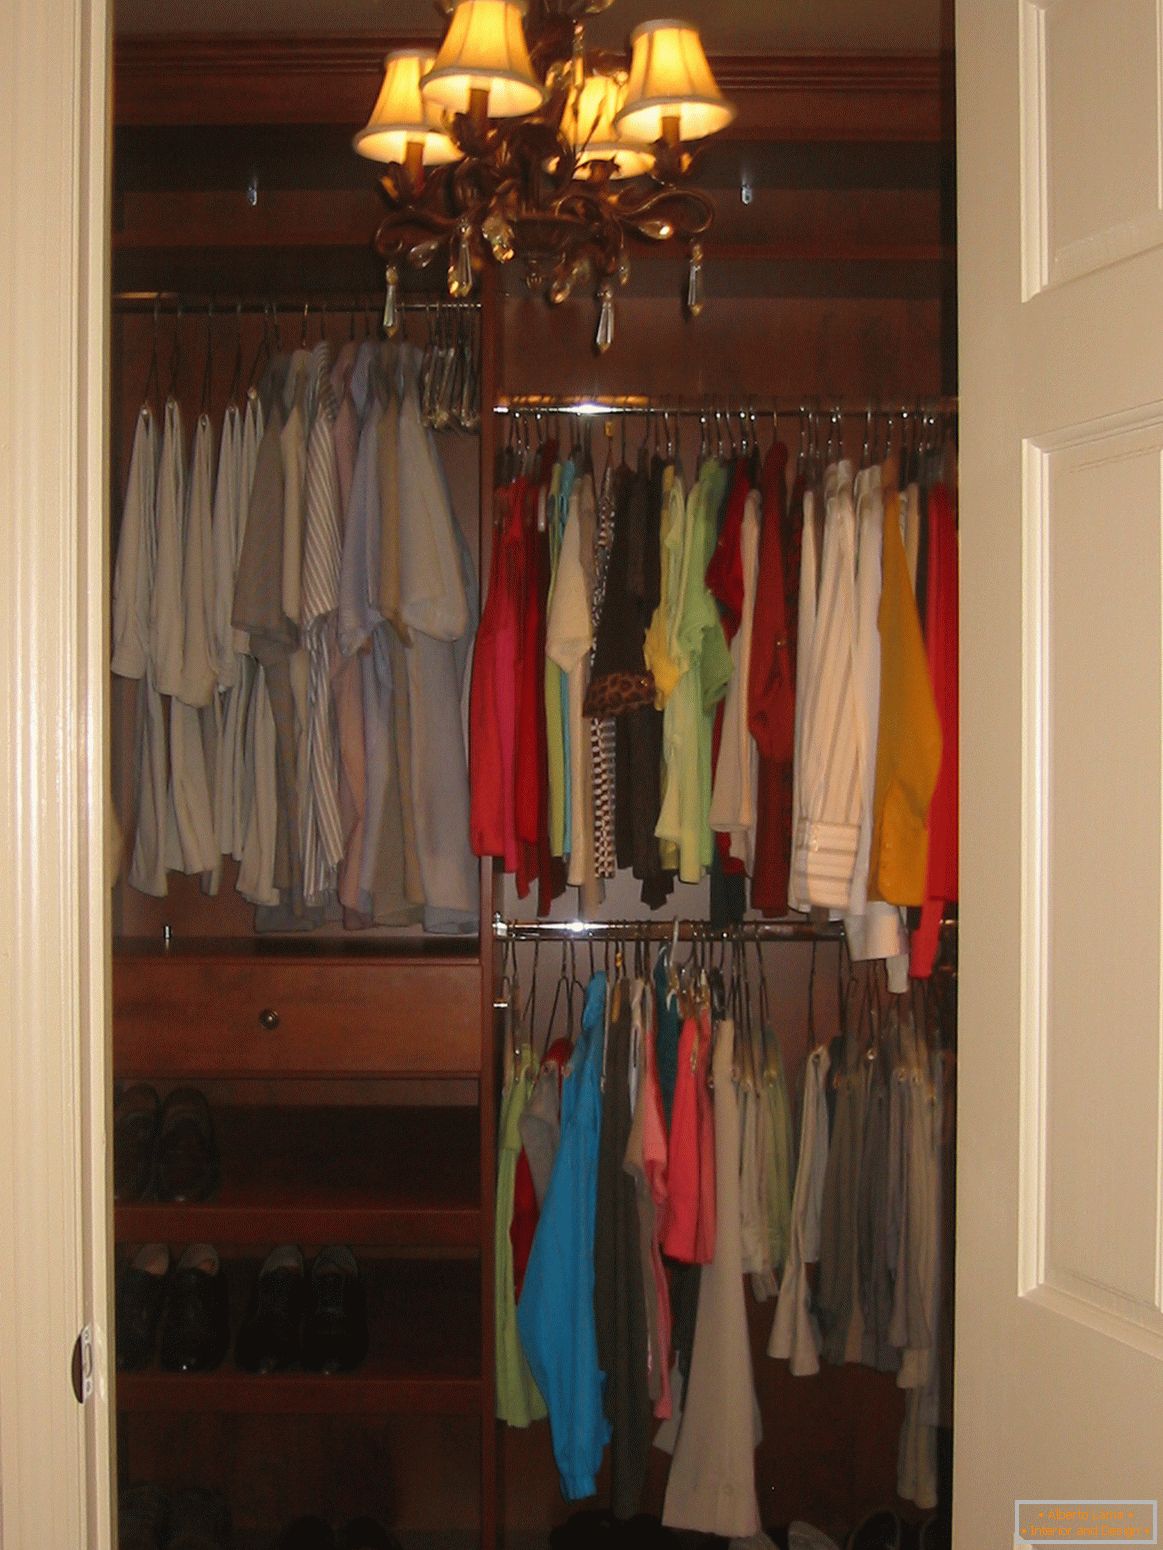 A small dressing room in the pantry